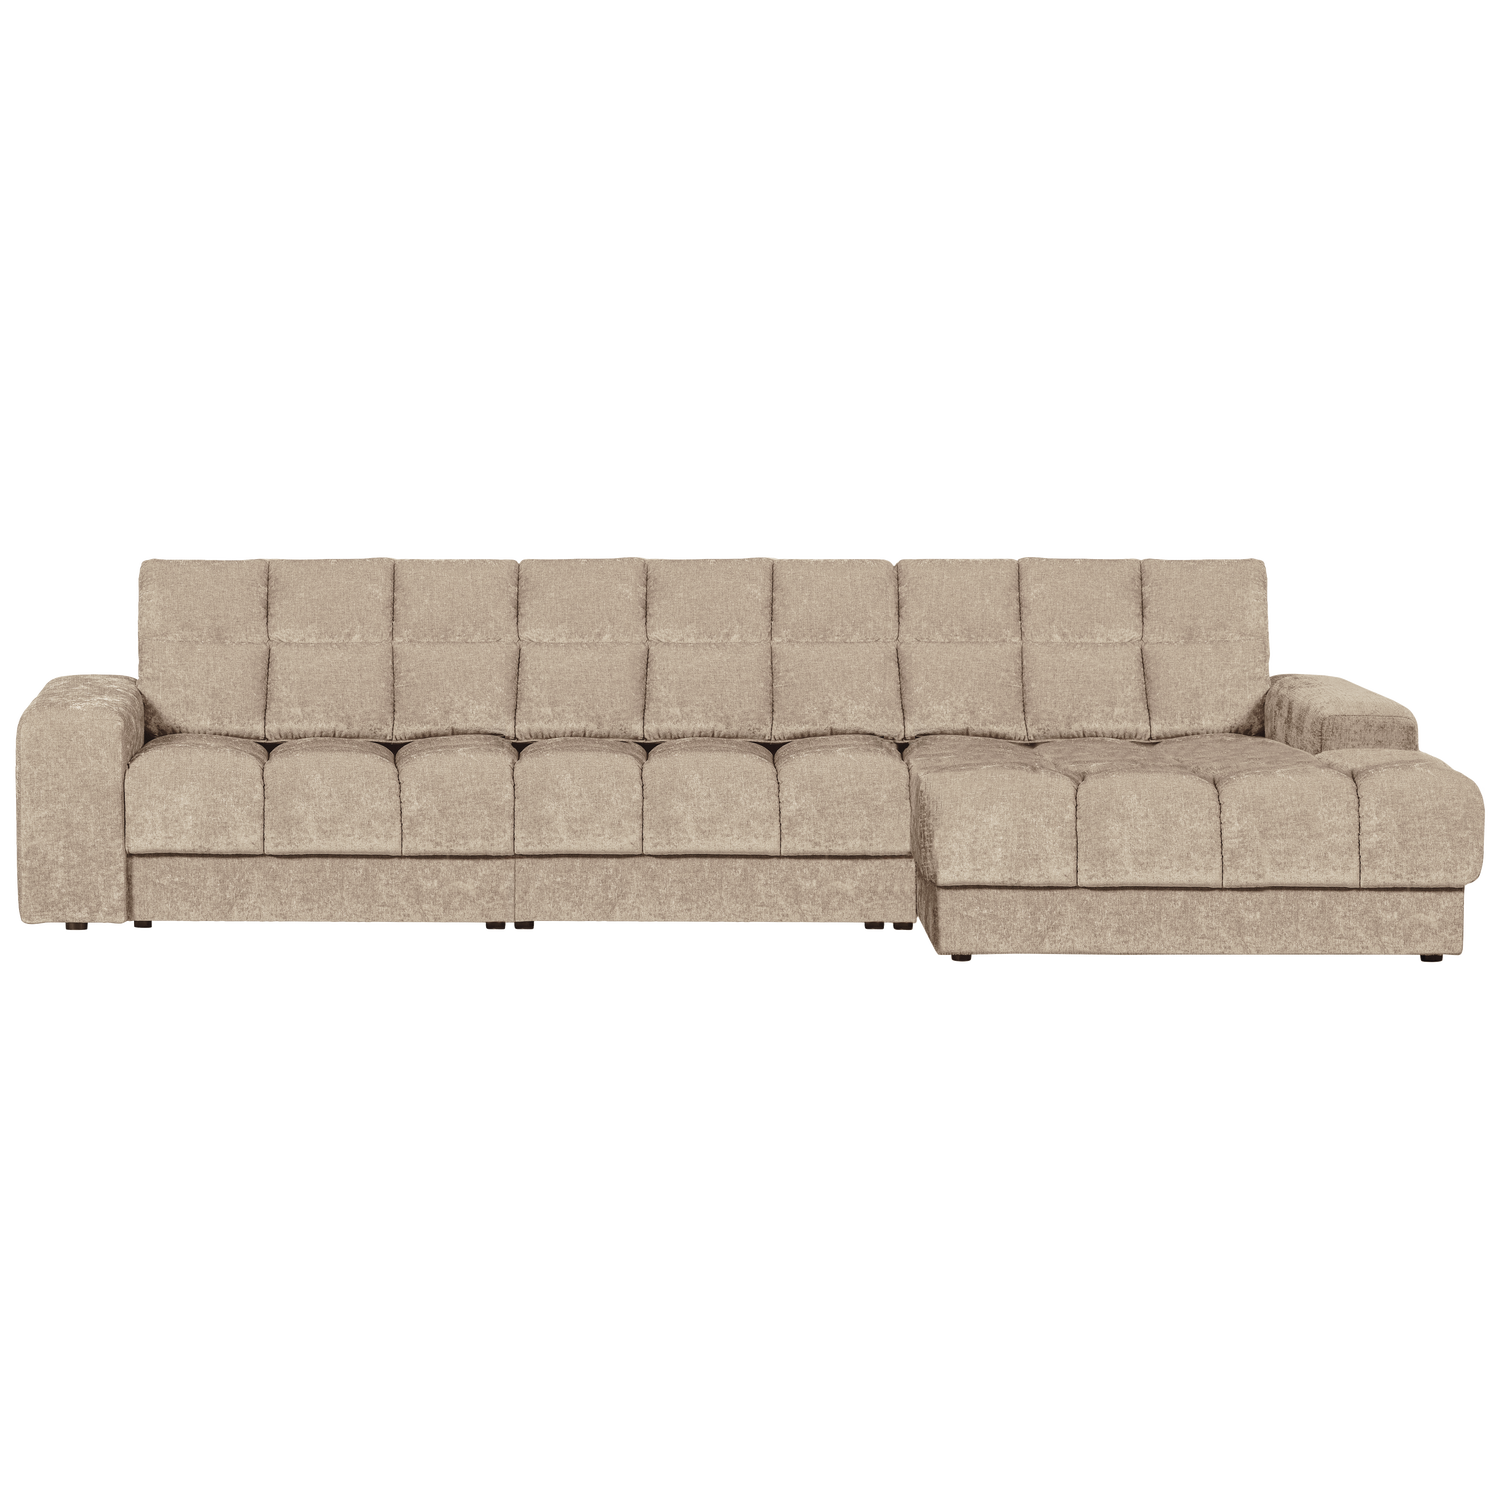 WOOOD Second date chaise longue rechts vintage nougat Taupe|Bruin Bank